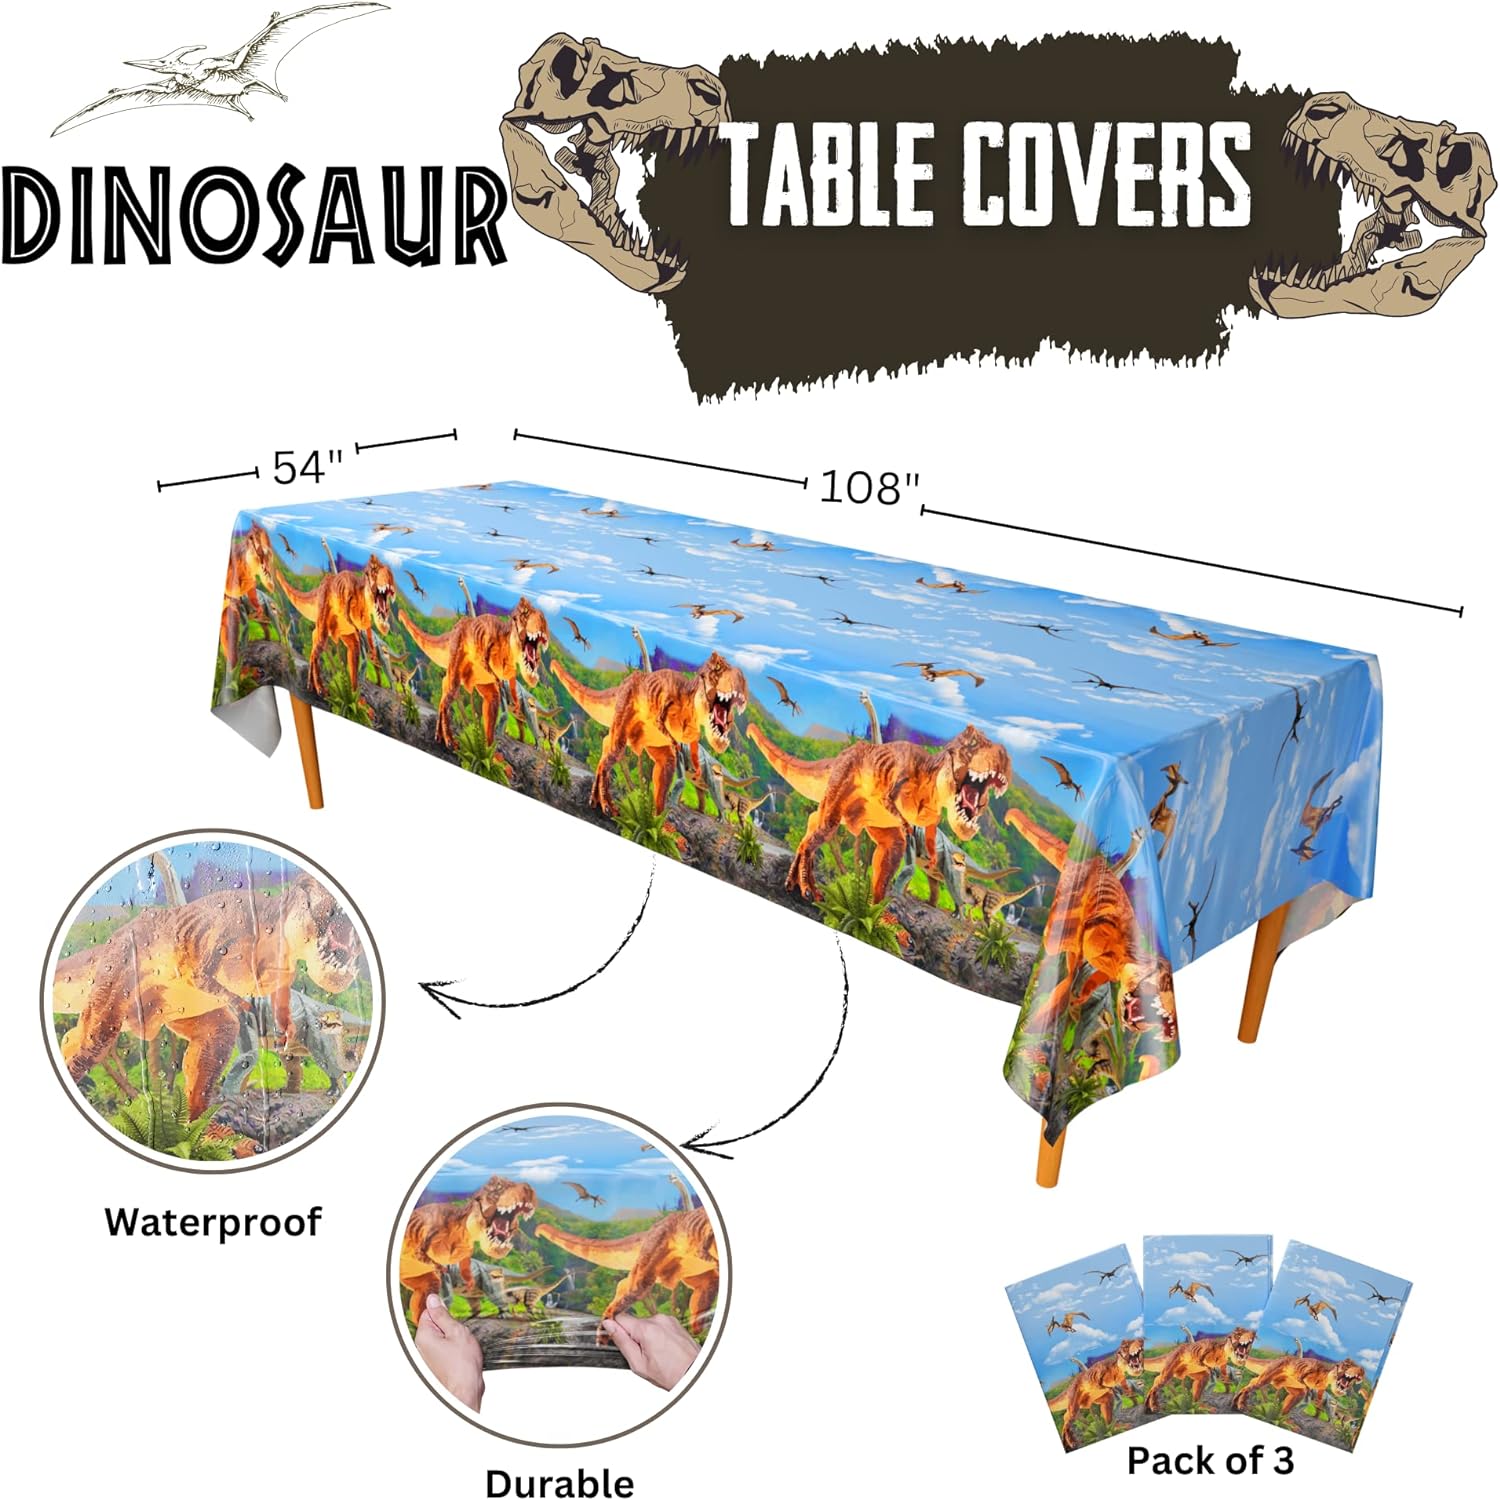 Dinosaur Table Covers (Pack of 3) 108"x54" XL